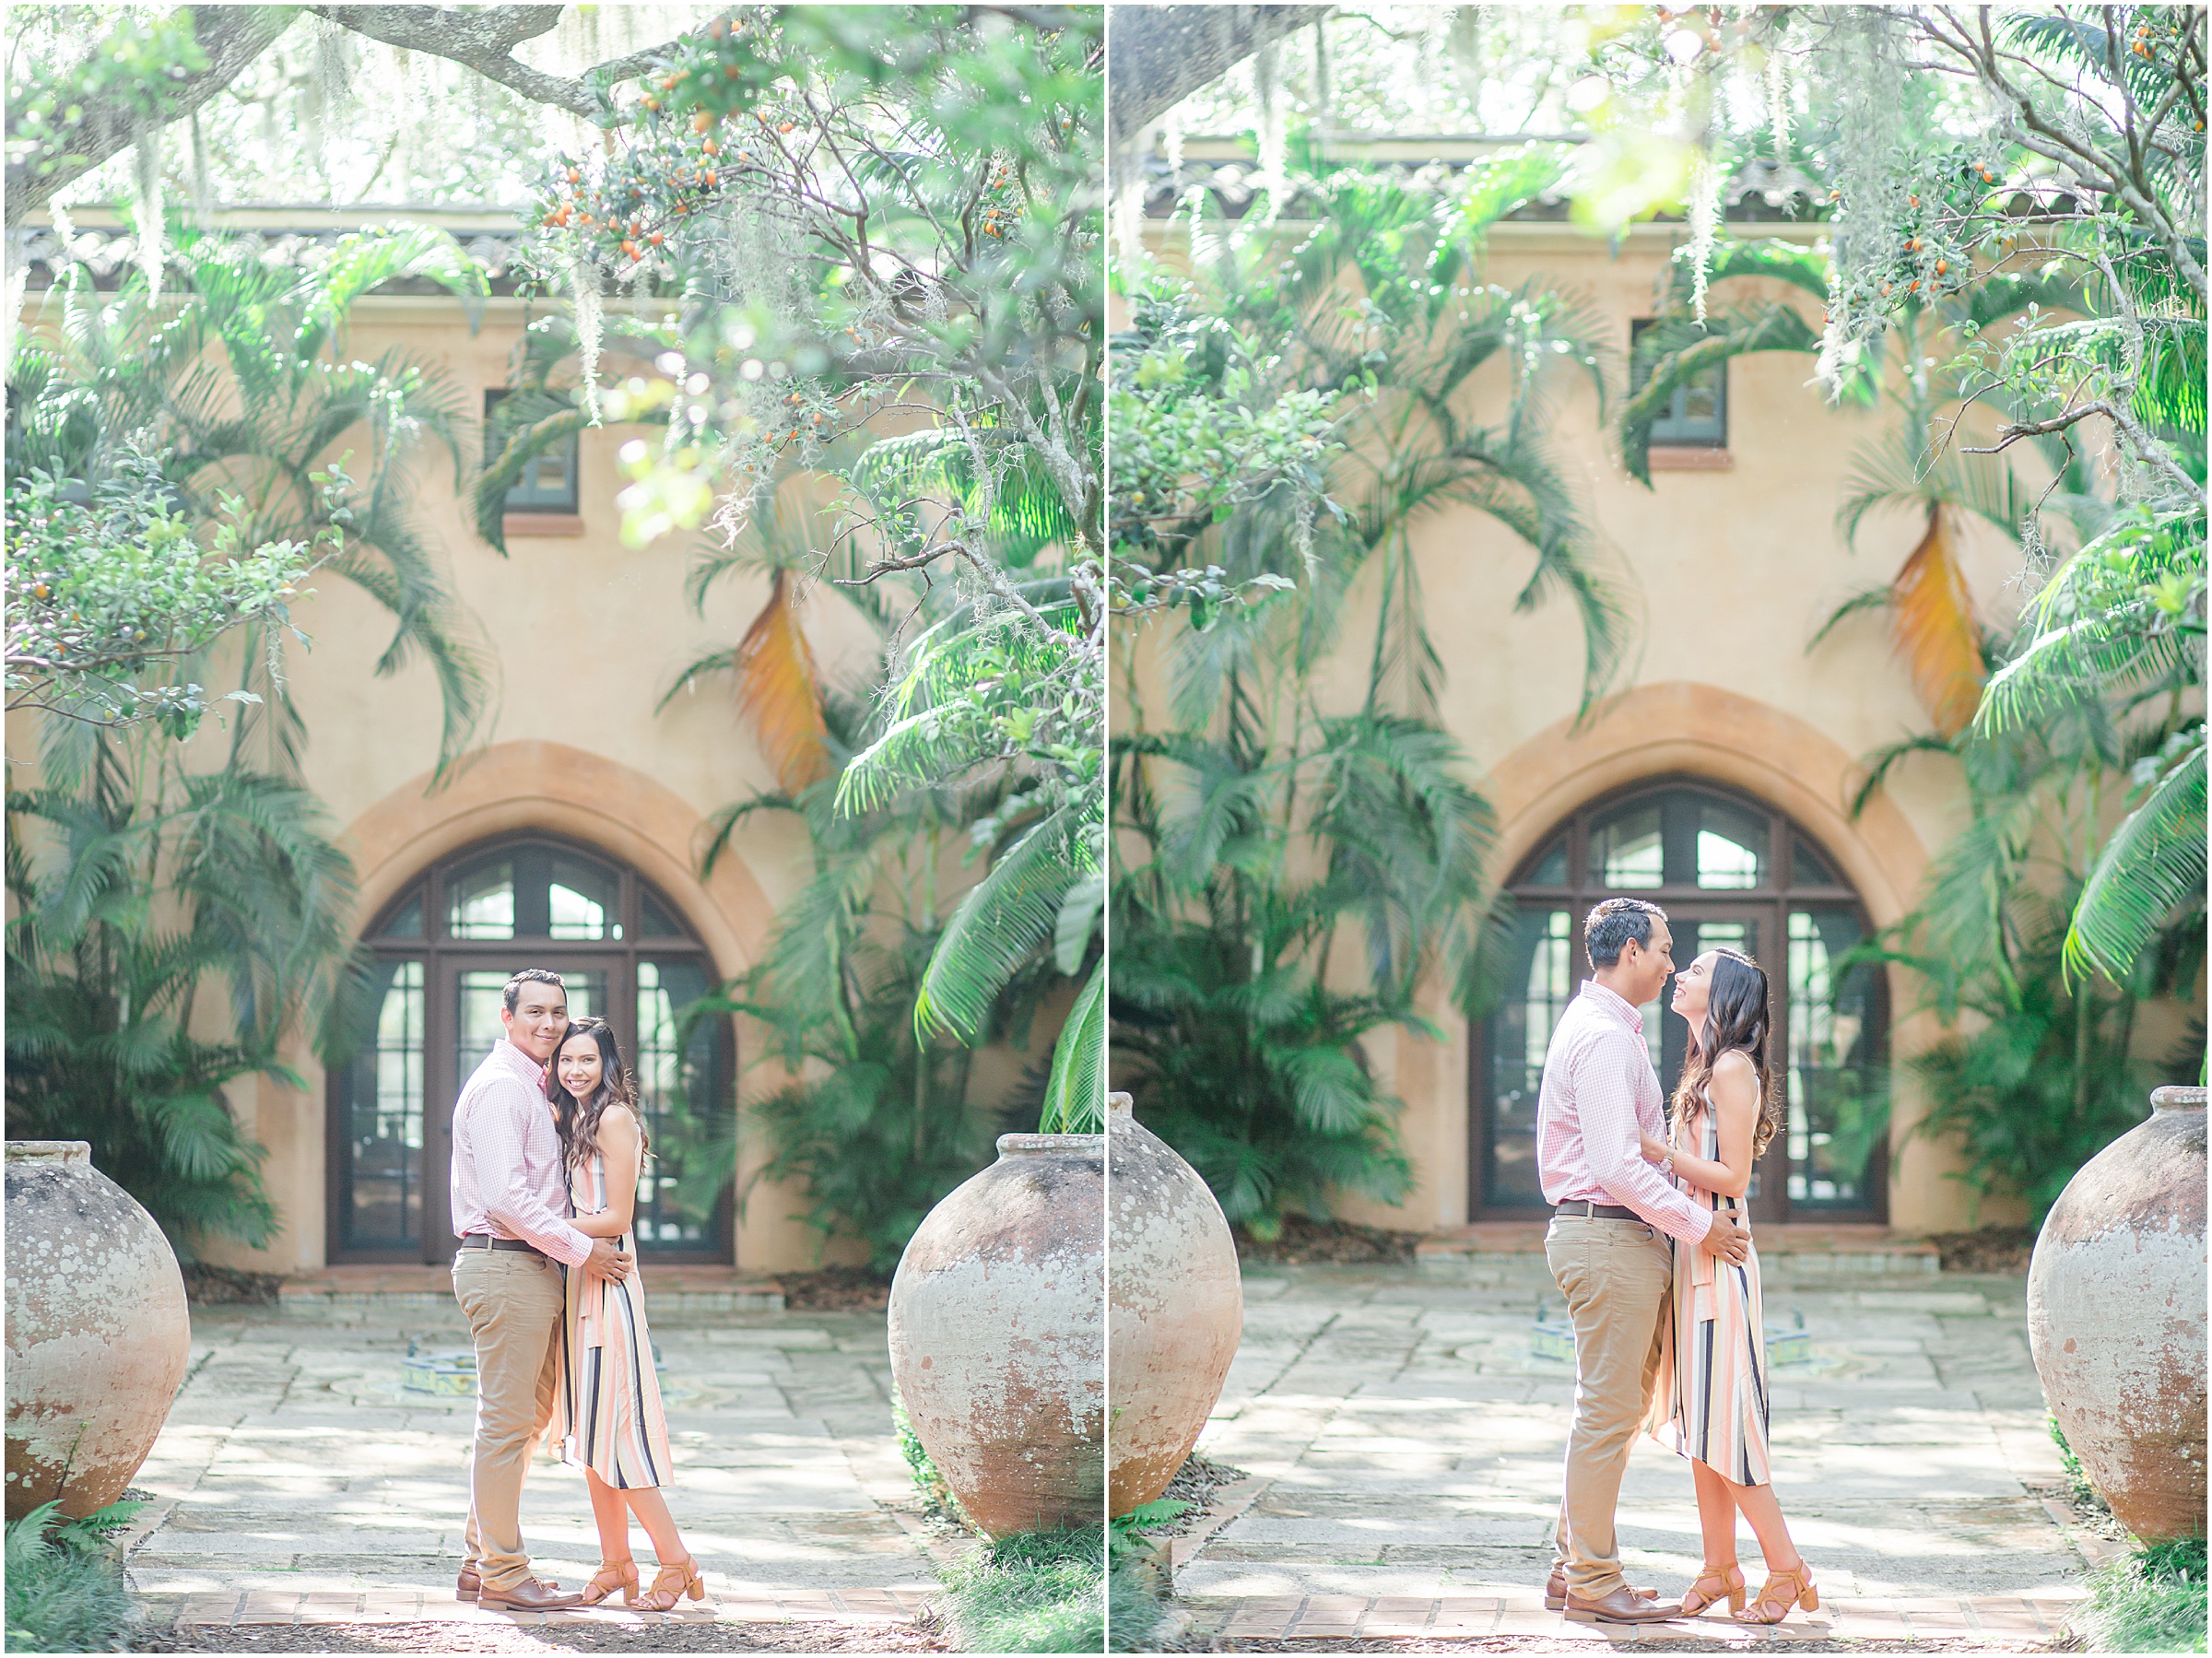 Carly & Robert at Bok Tower Gardens in the Florida summer heat.